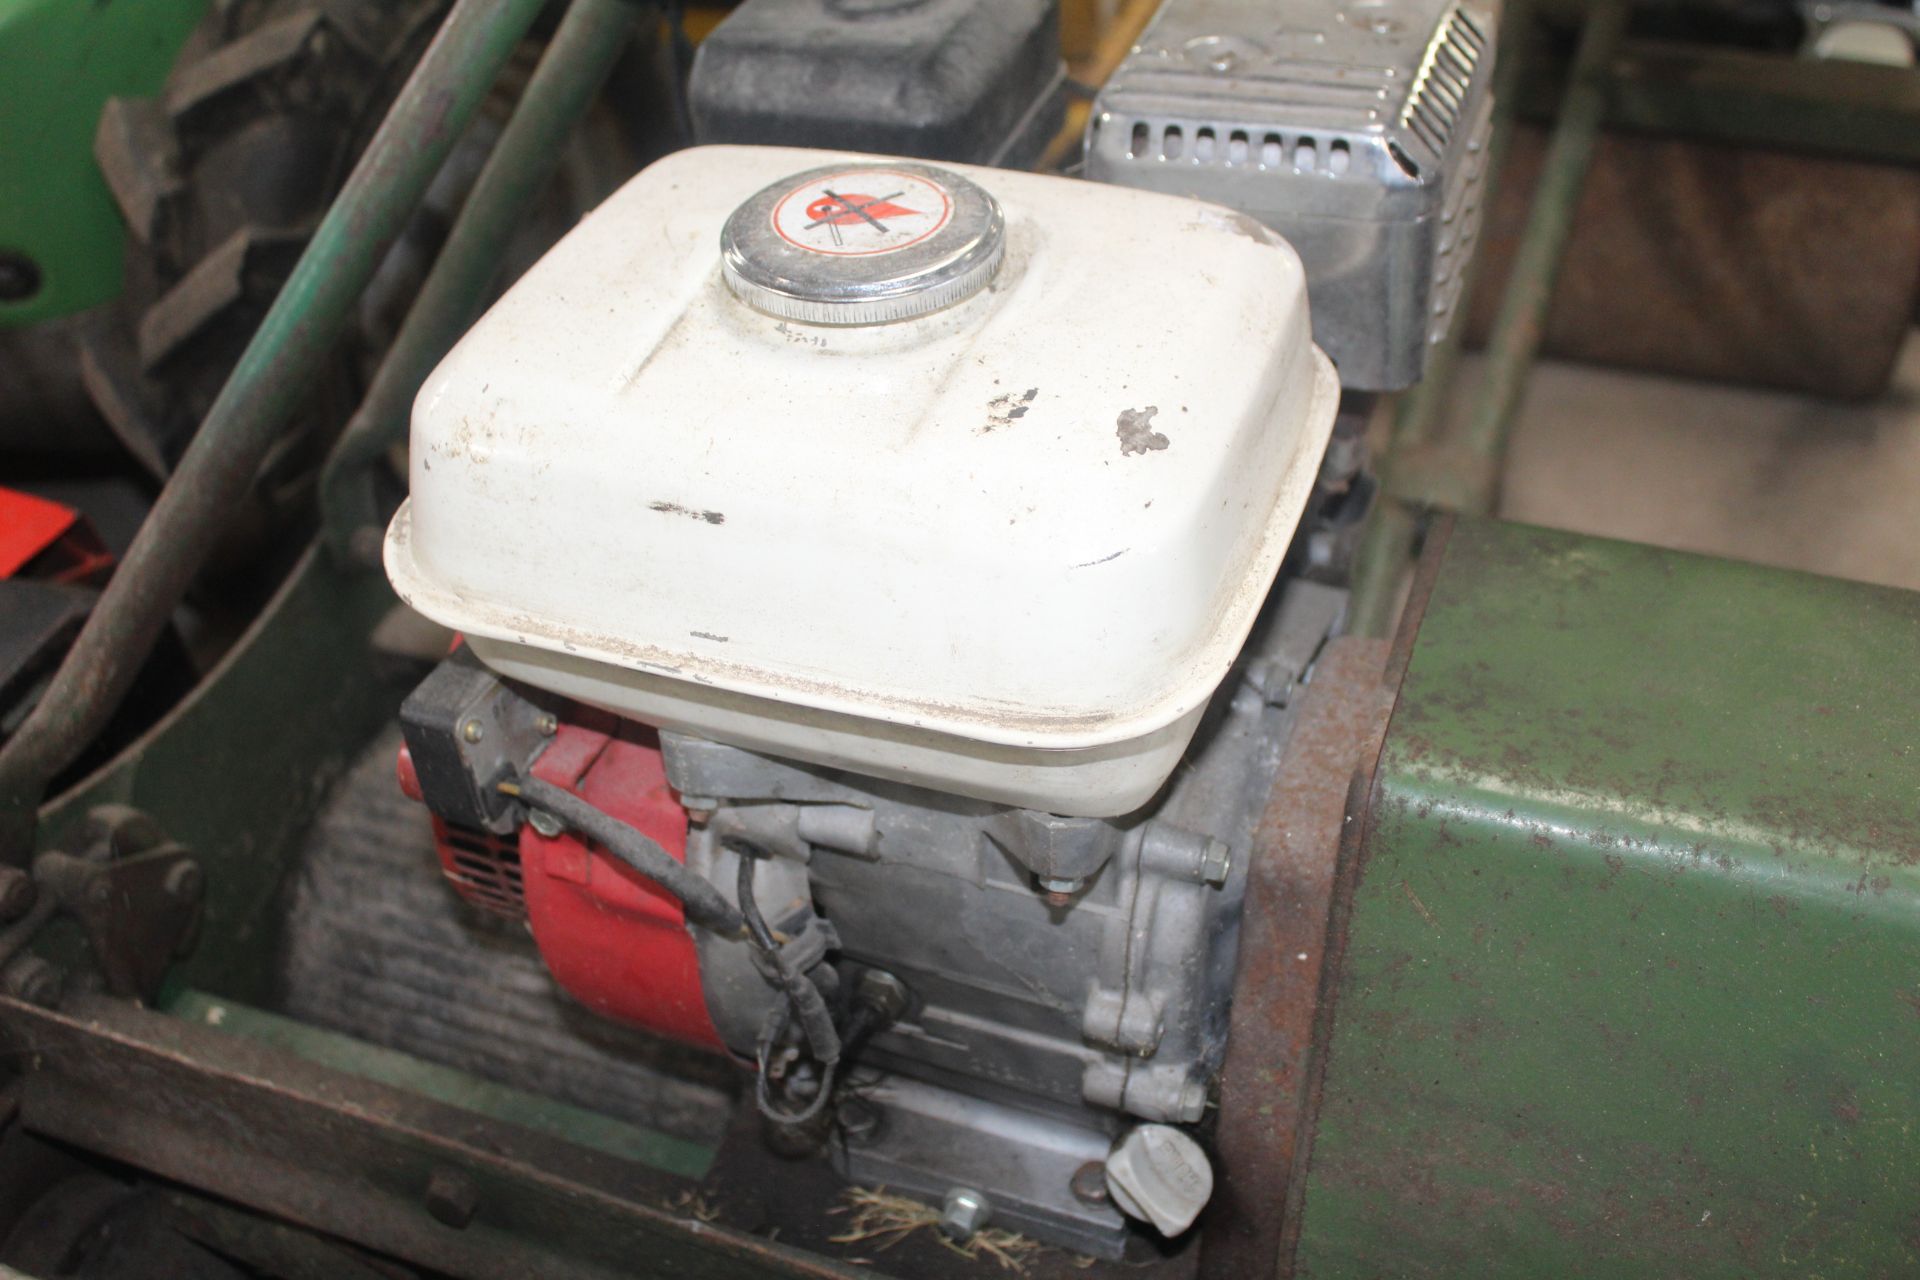 Atco B30 Royal lawn mower. With roller seat and grass box. From local deceased estate. - Image 4 of 11